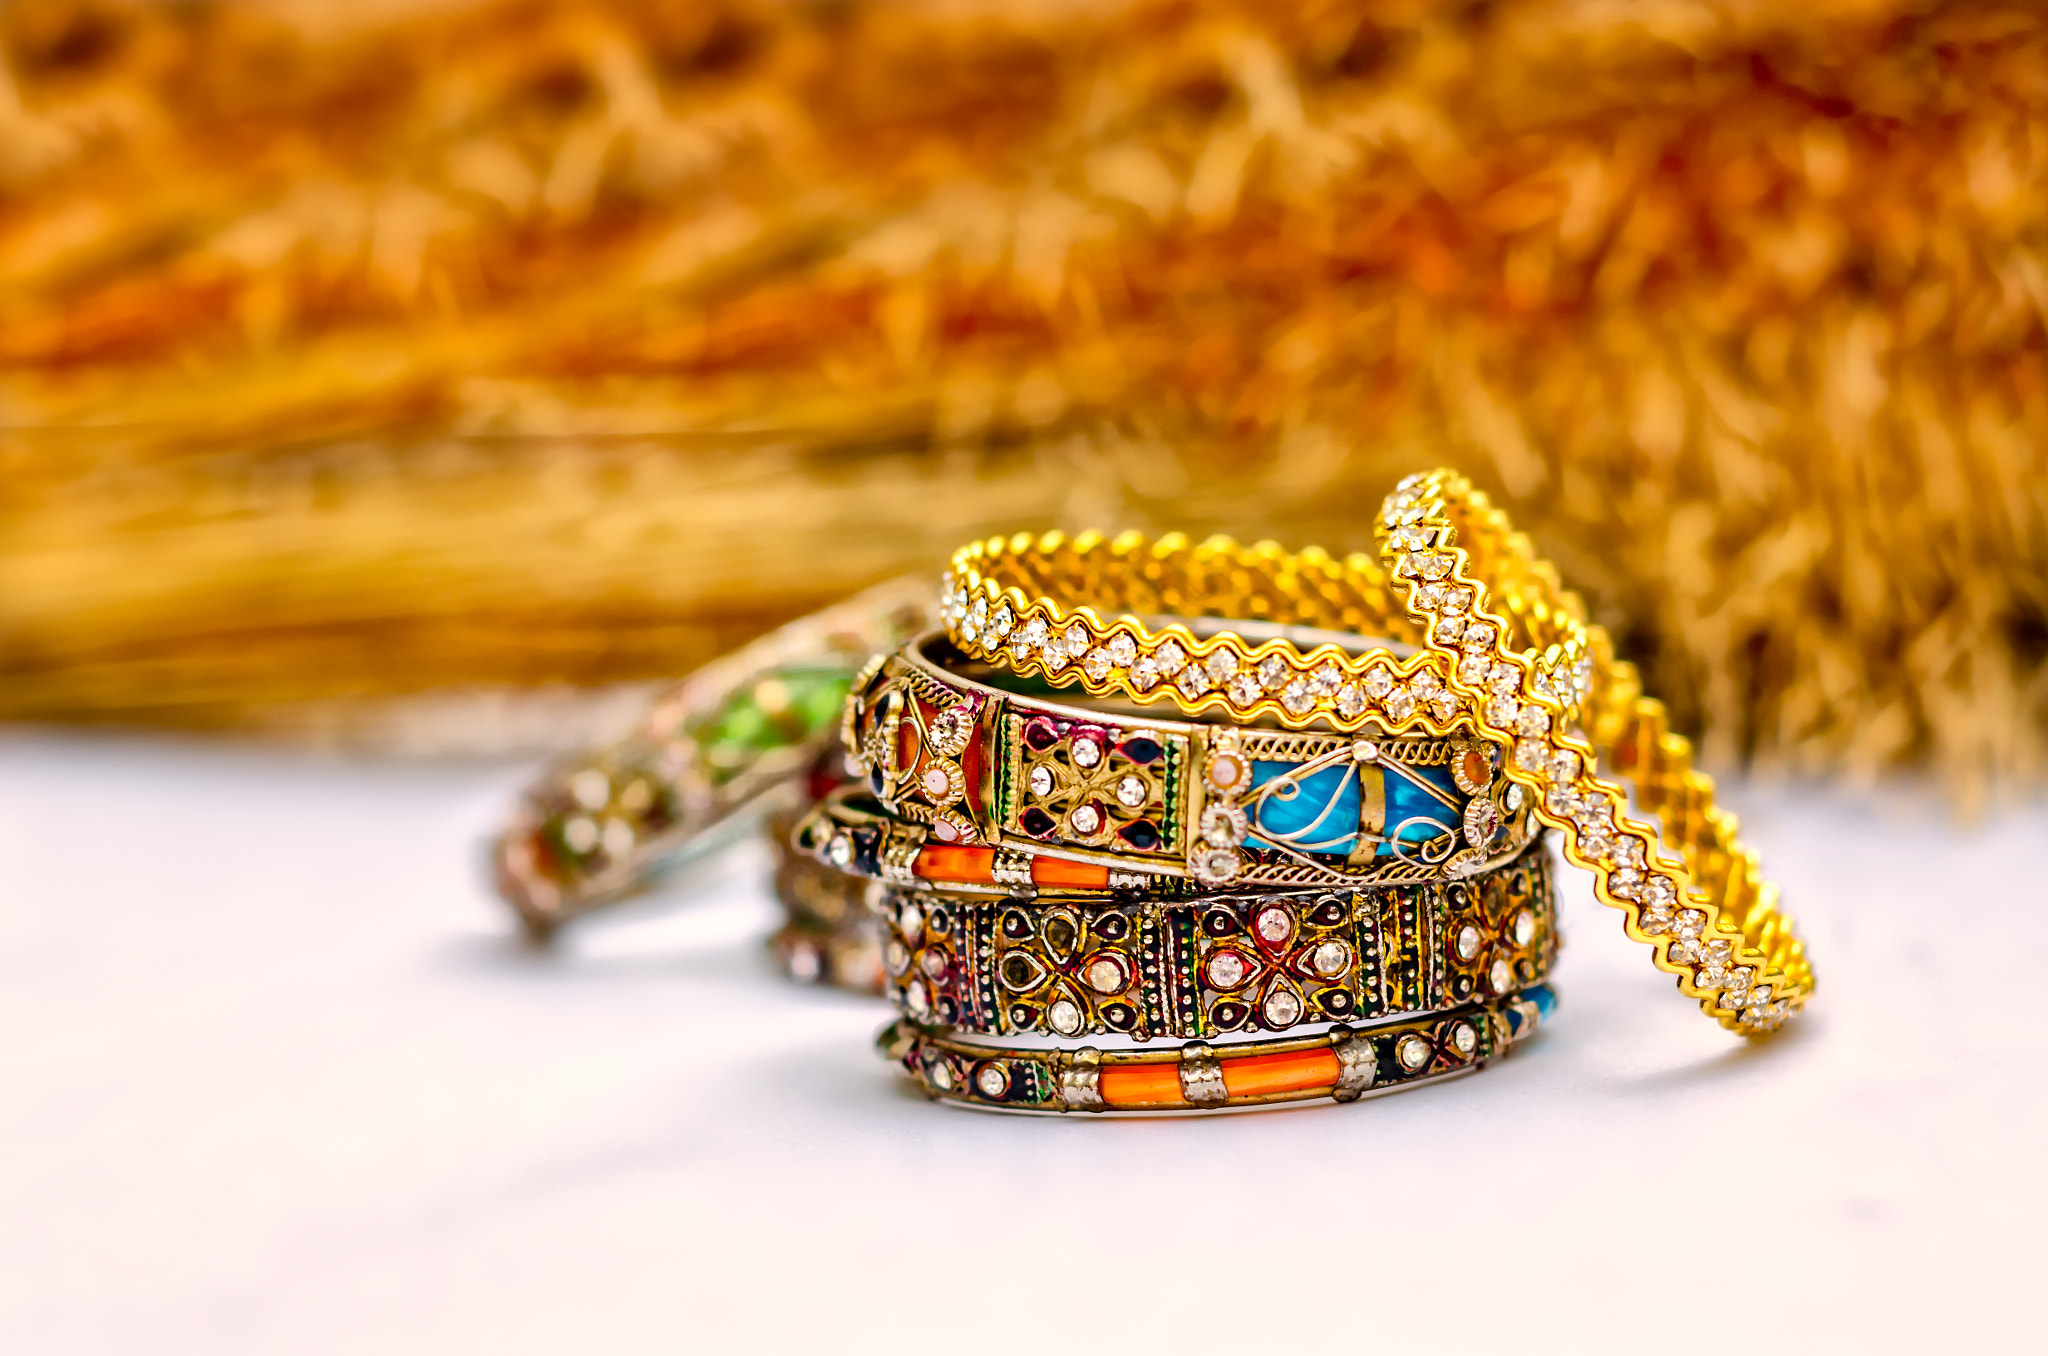 bangles indian dress accessories - bangles indian dress accessories ...